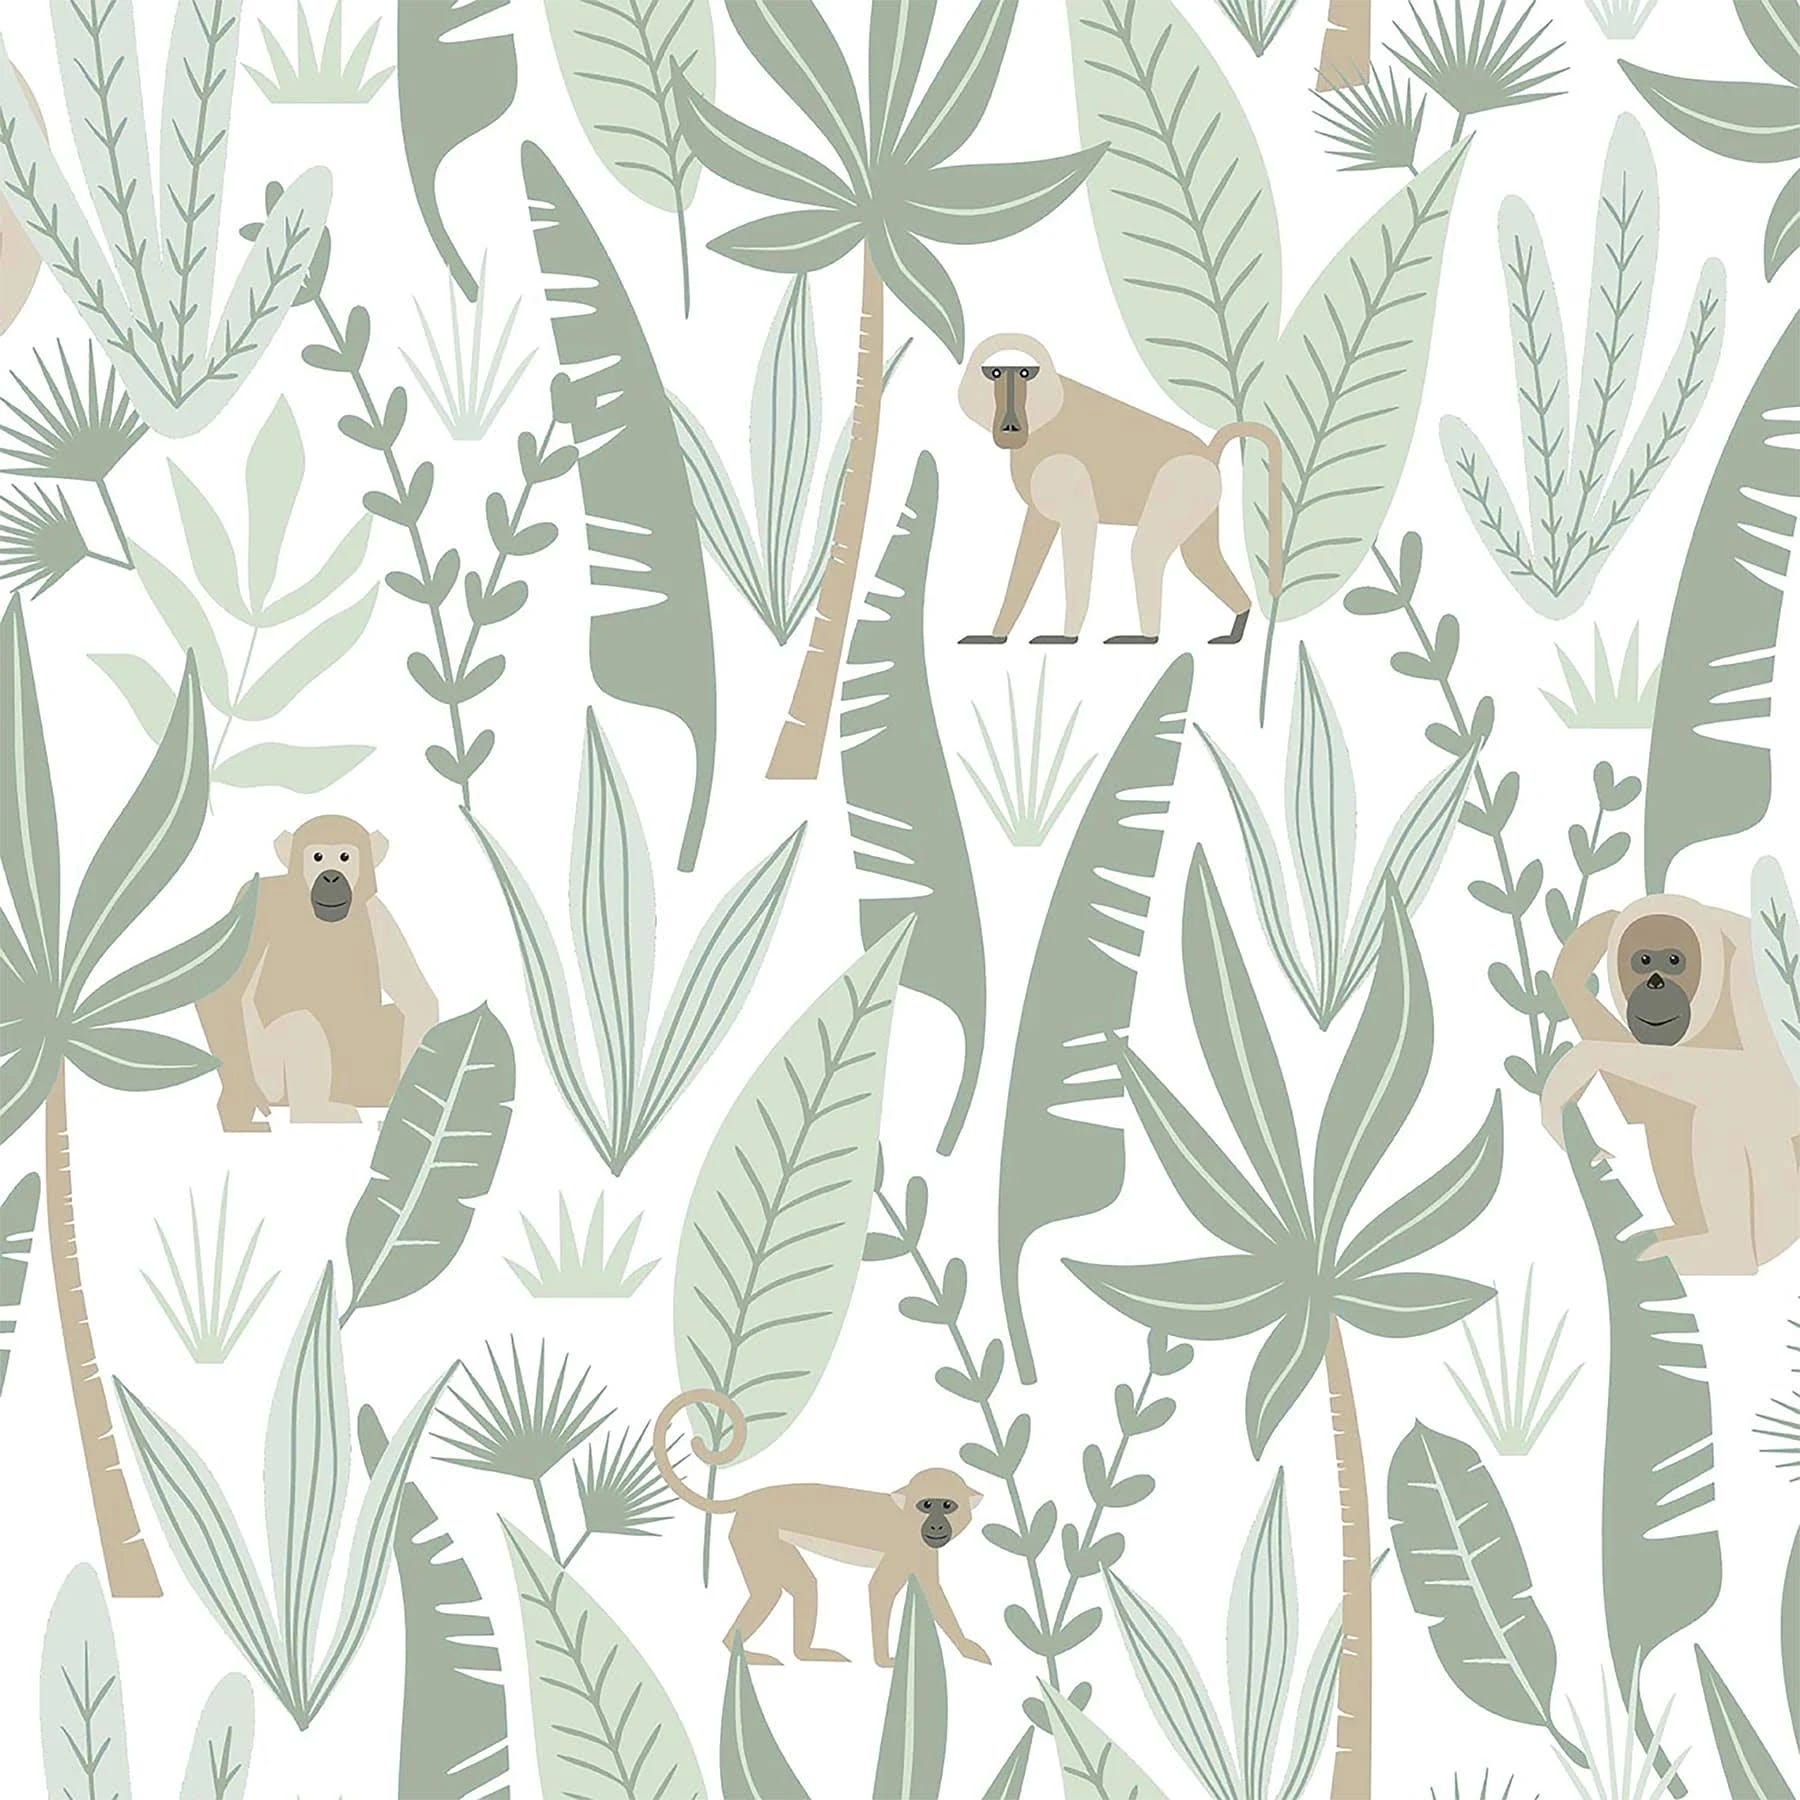 Vibrant Green Monkey Wallpaper for Jungle-Themed Rooms | Image